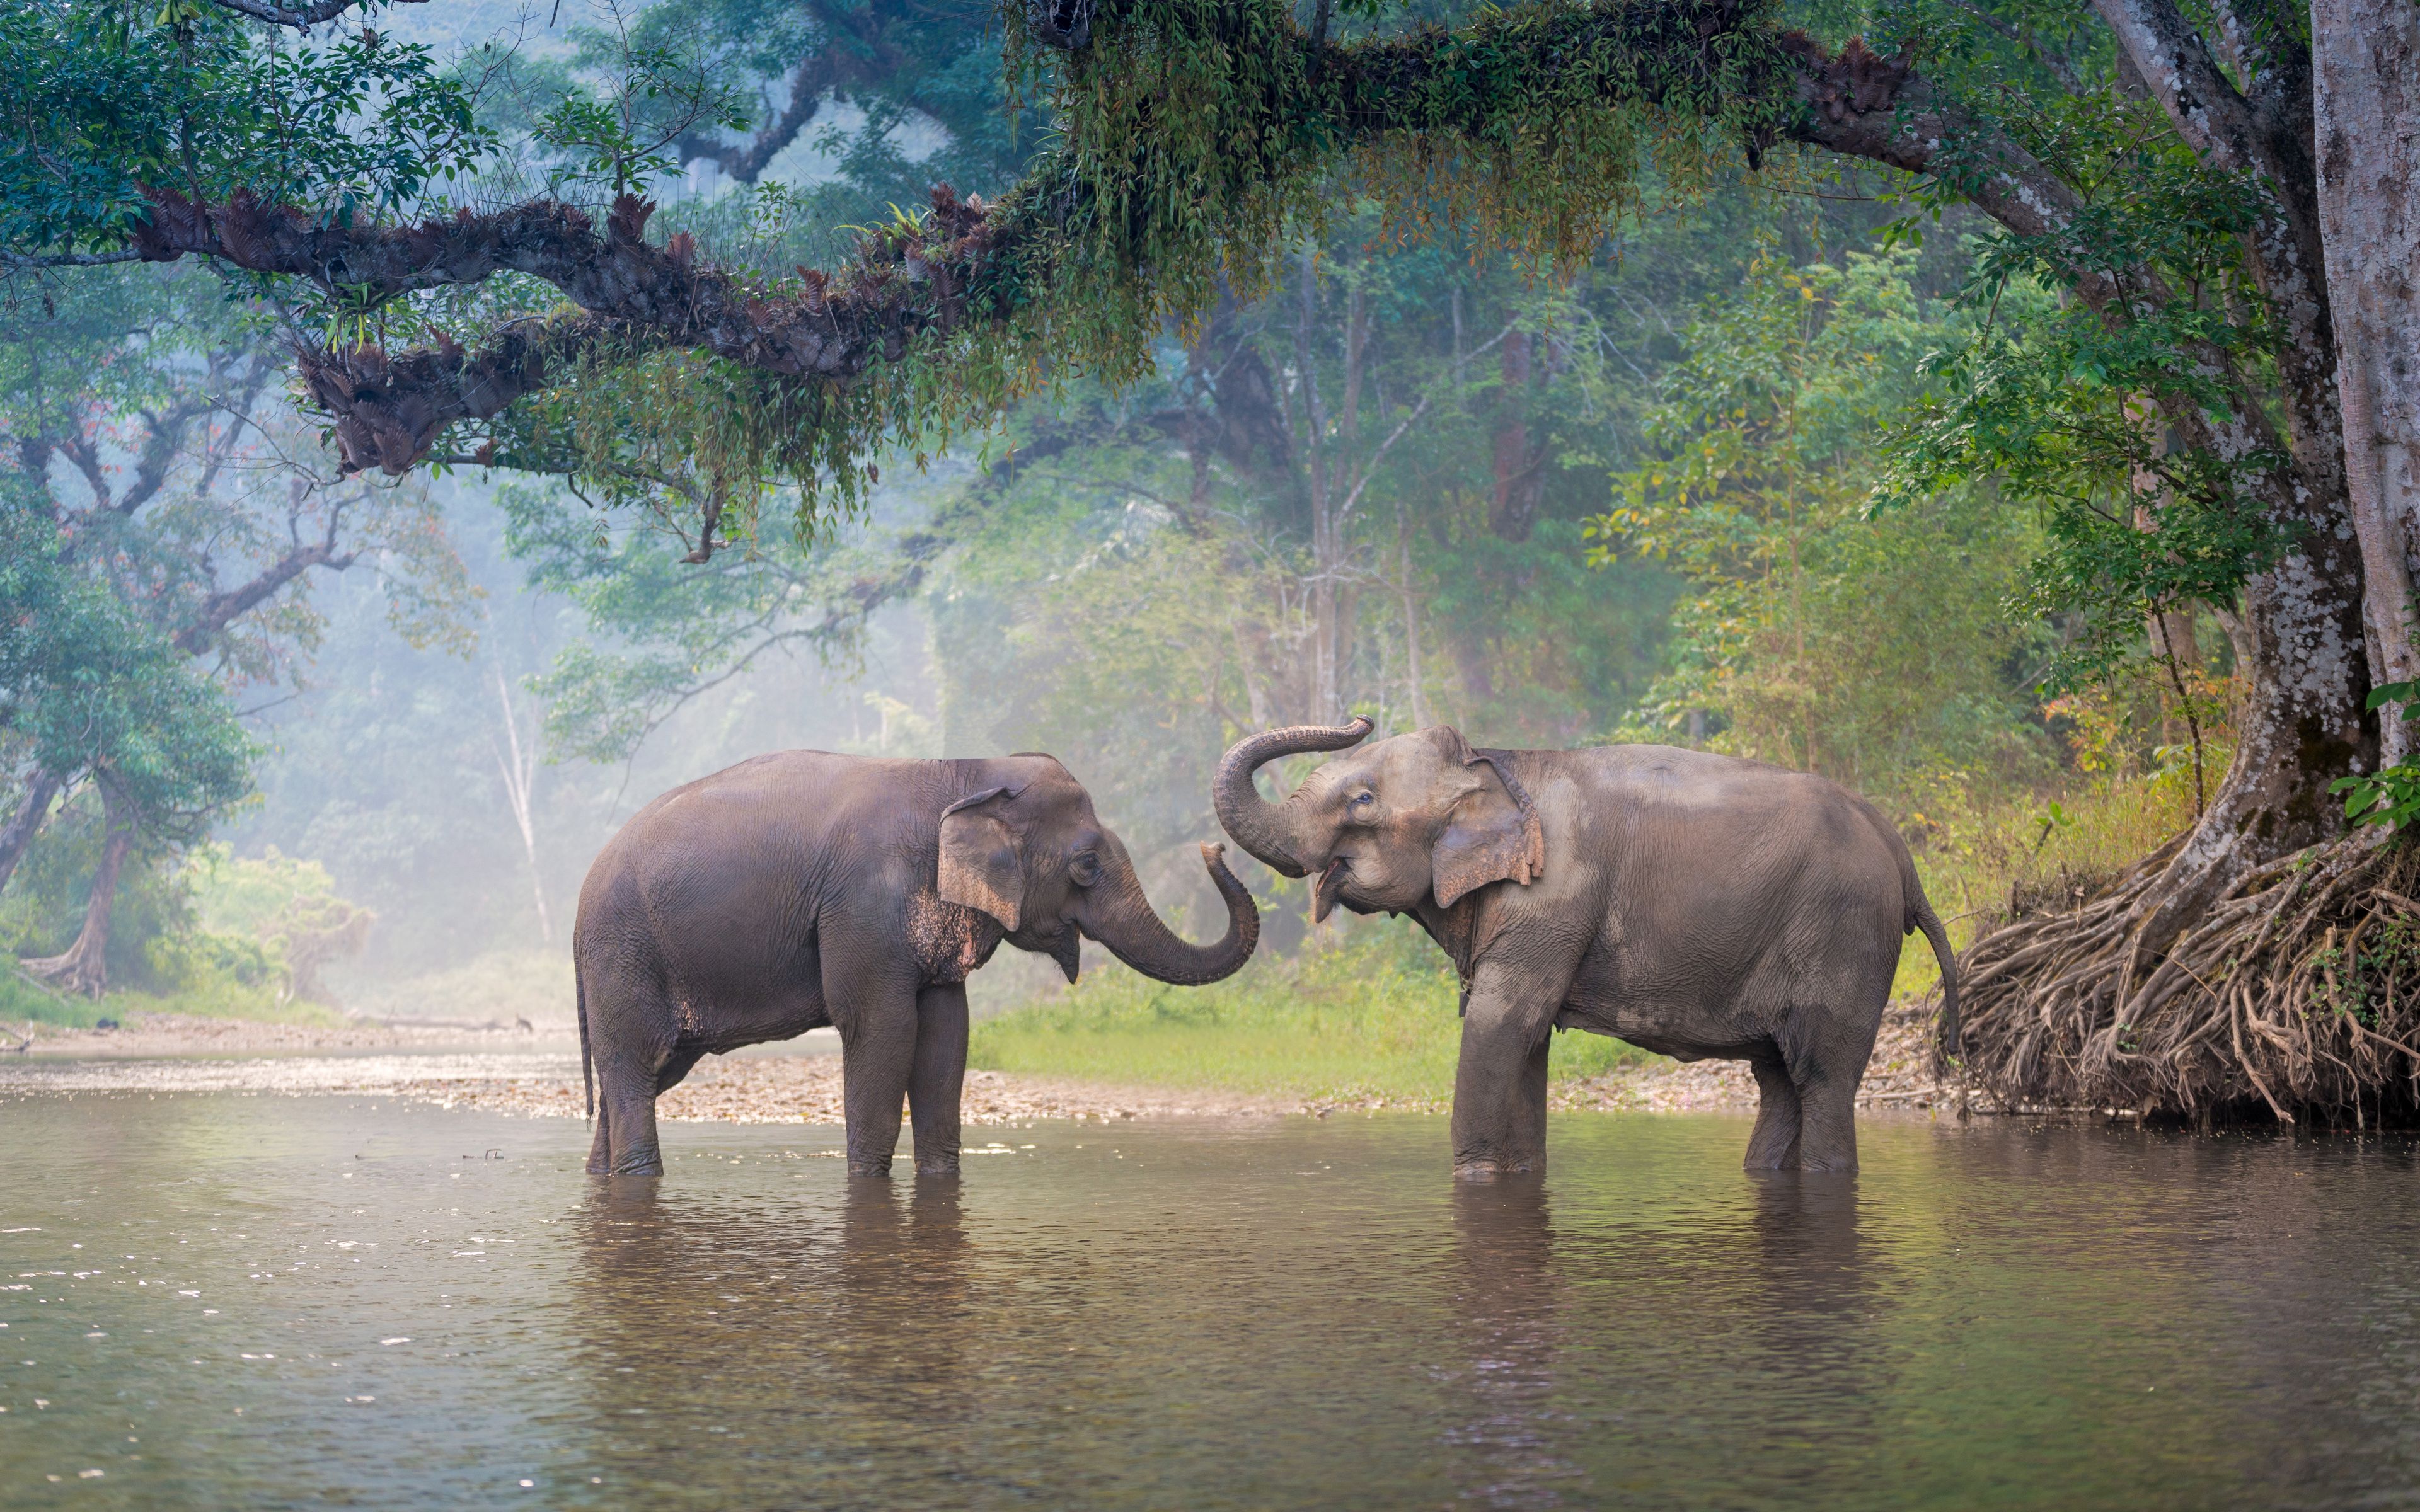 4k Elephant HD Wallpapers 1000 Free 4k Elephant Wallpaper Images For All  Devices